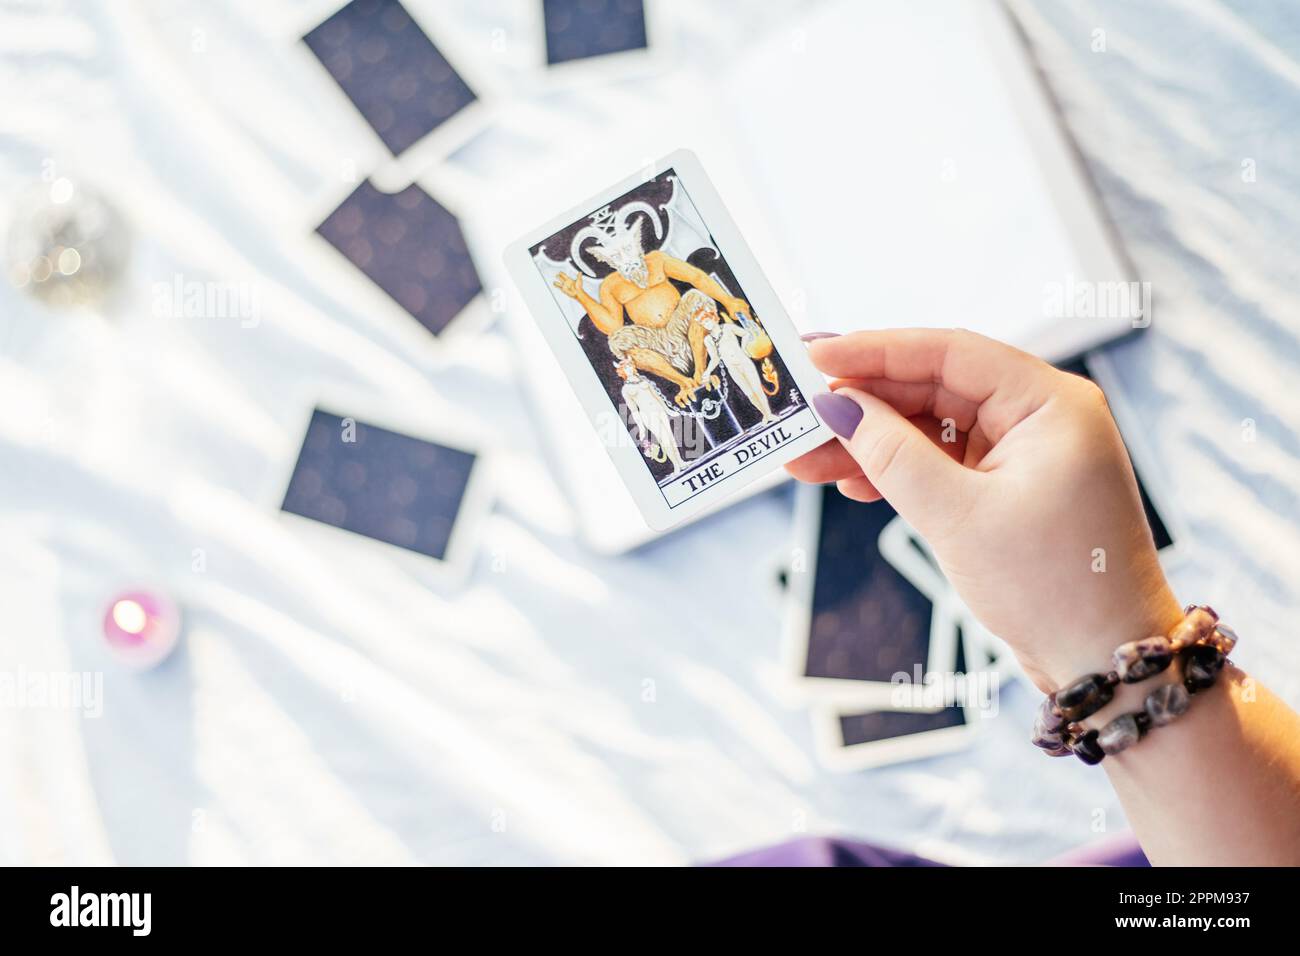 Female hand with purple nails holds tarot card named Devil over white surface with open notebook and candle. Top view Stock Photo